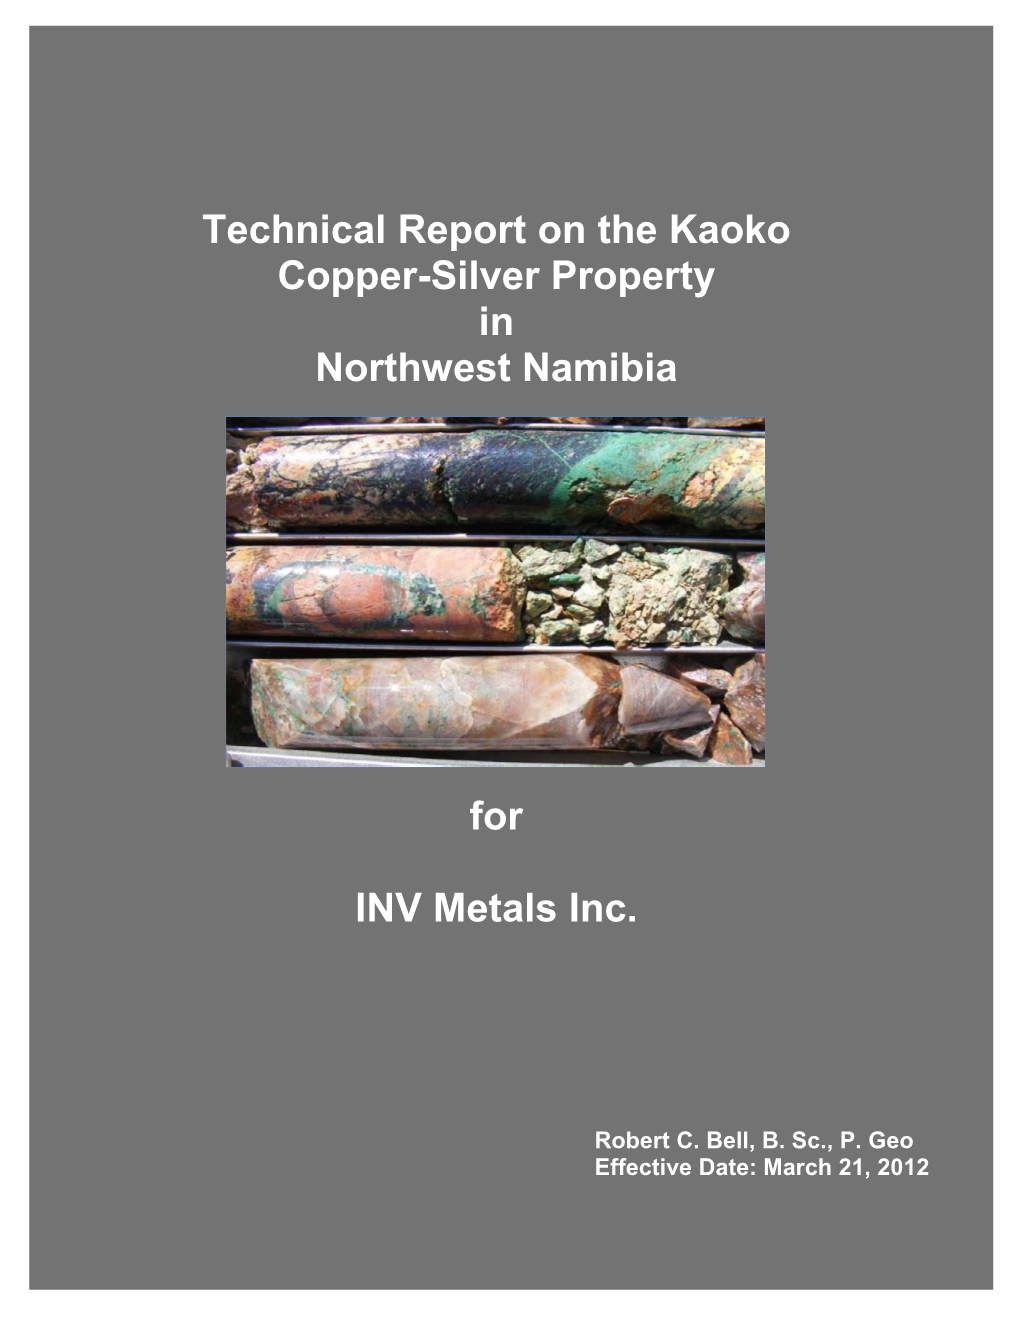 Technical Report on the Kaoko Copper-Silver Property in Northwest Namibia